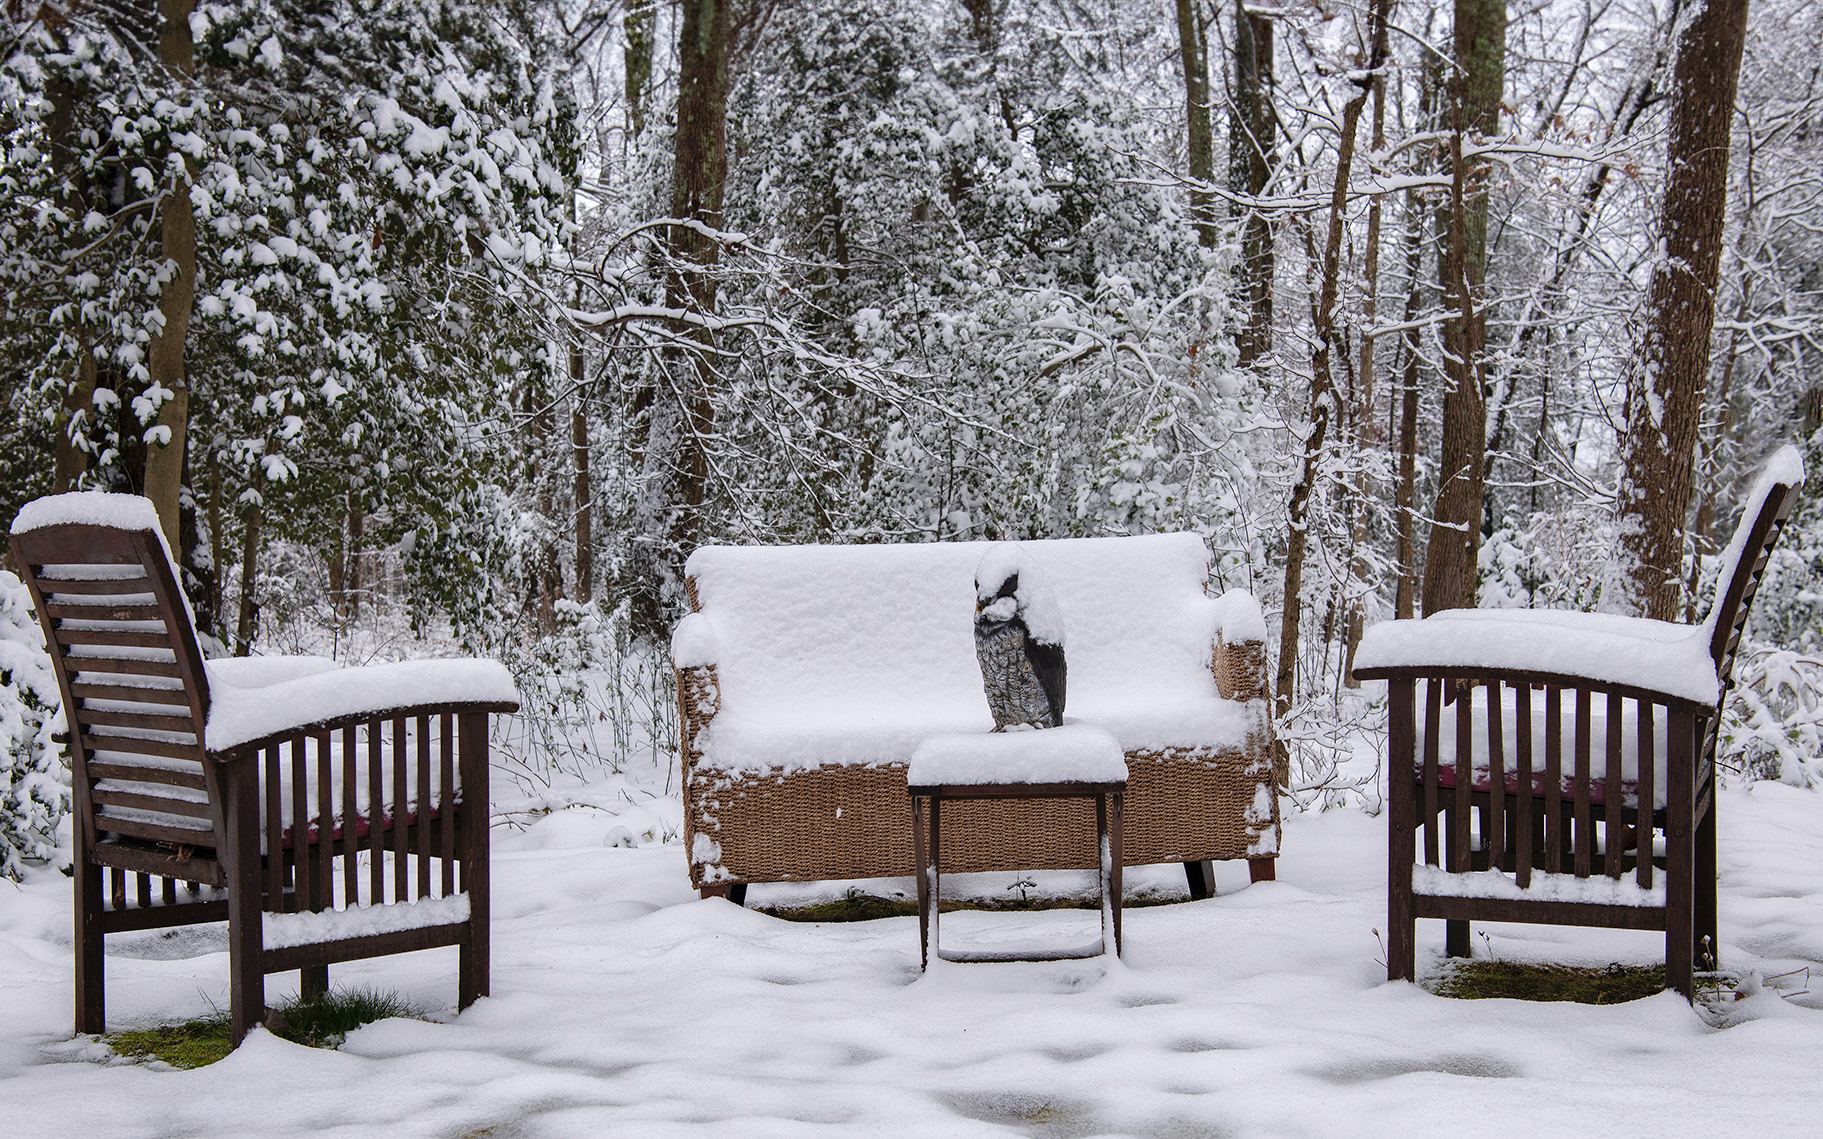 snow covered wooden and wicker furniture in backyard setting